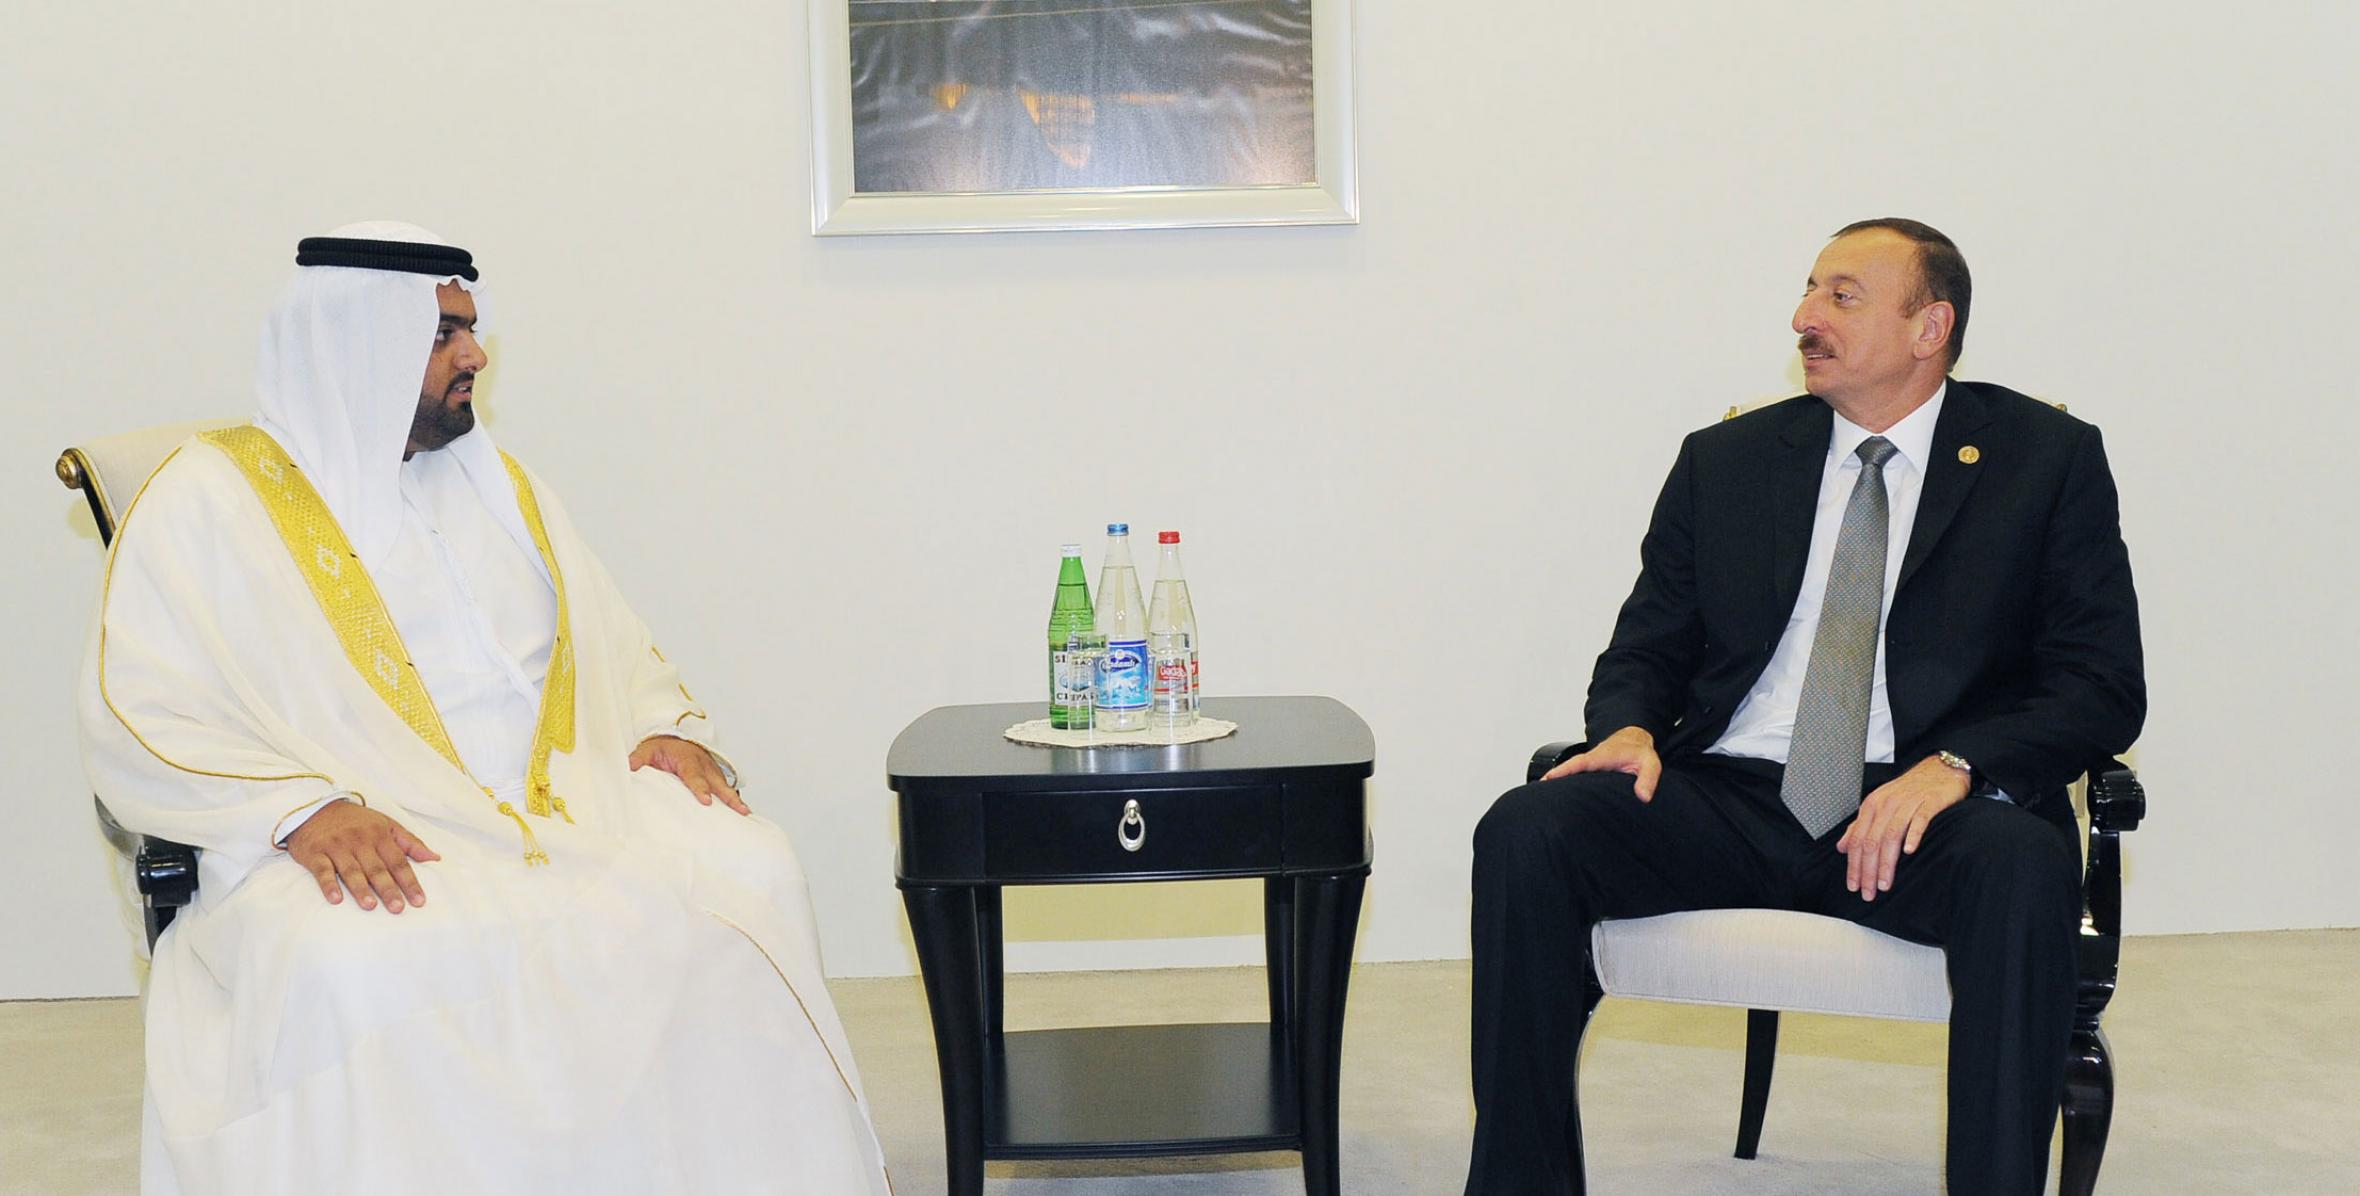 Ilham Aliyev met with the Crown Prince of the Emirate of Fujairah of the United Arab Emirates, Mohammed bin Hamad bin Mohammed Al Sharqi